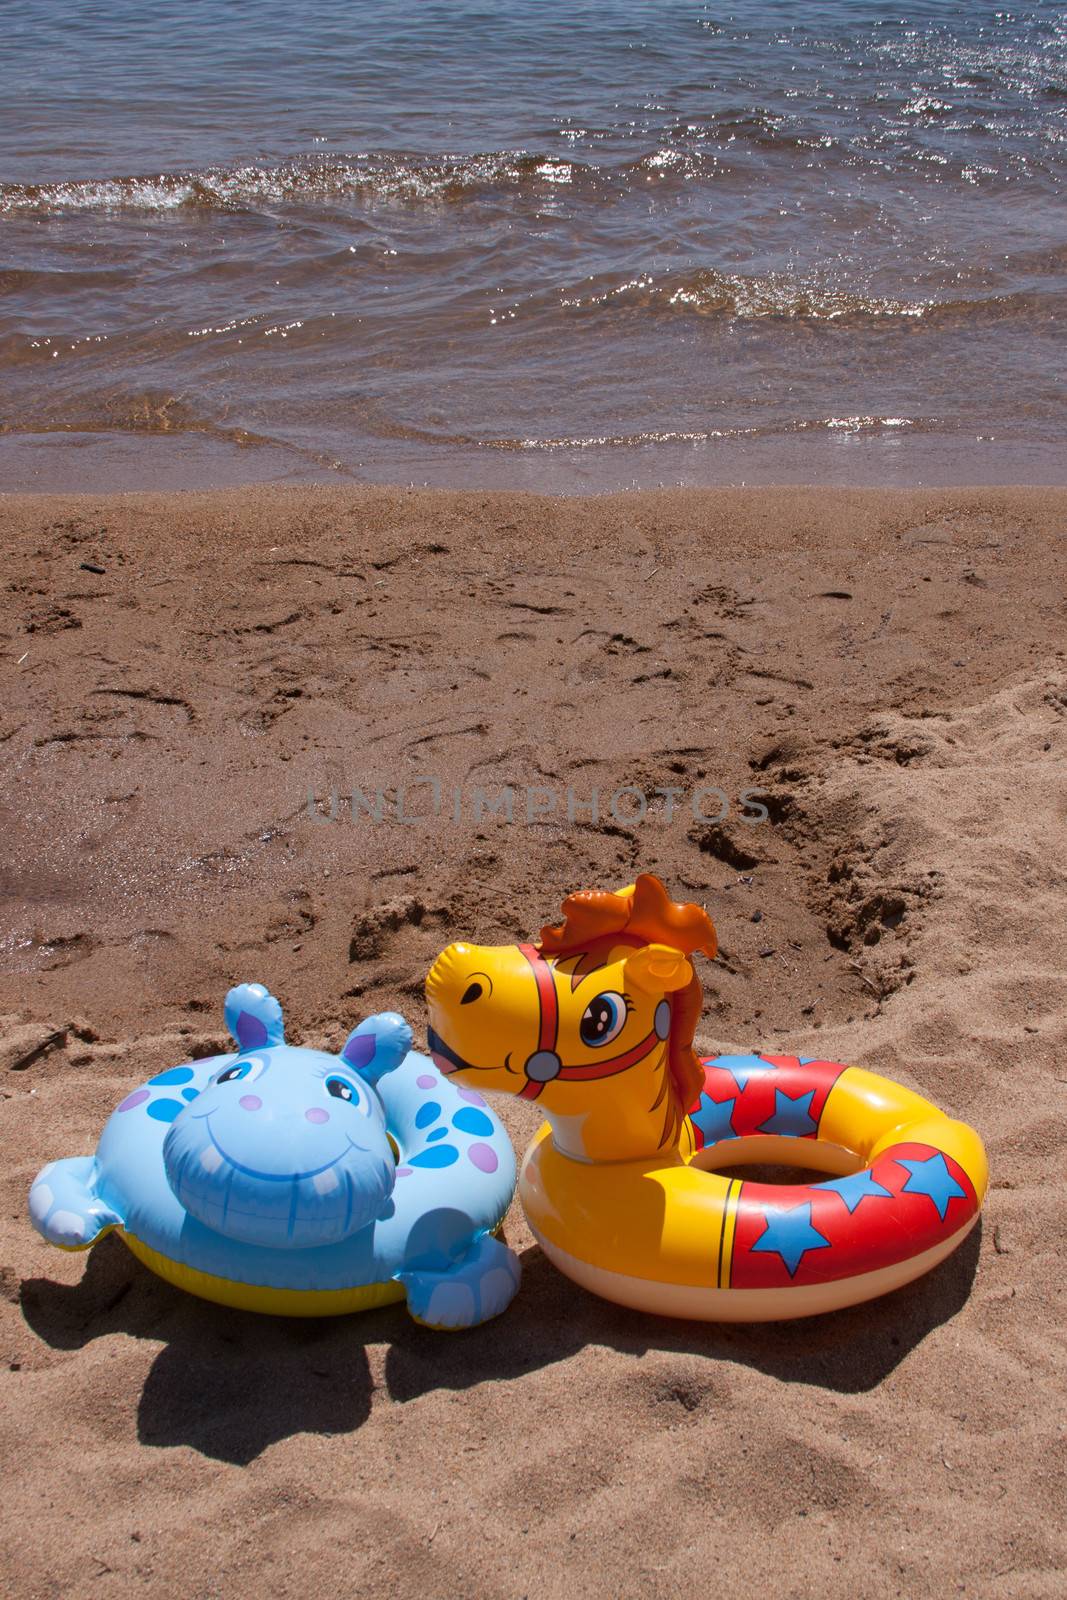 Children's floating toys on the beach.